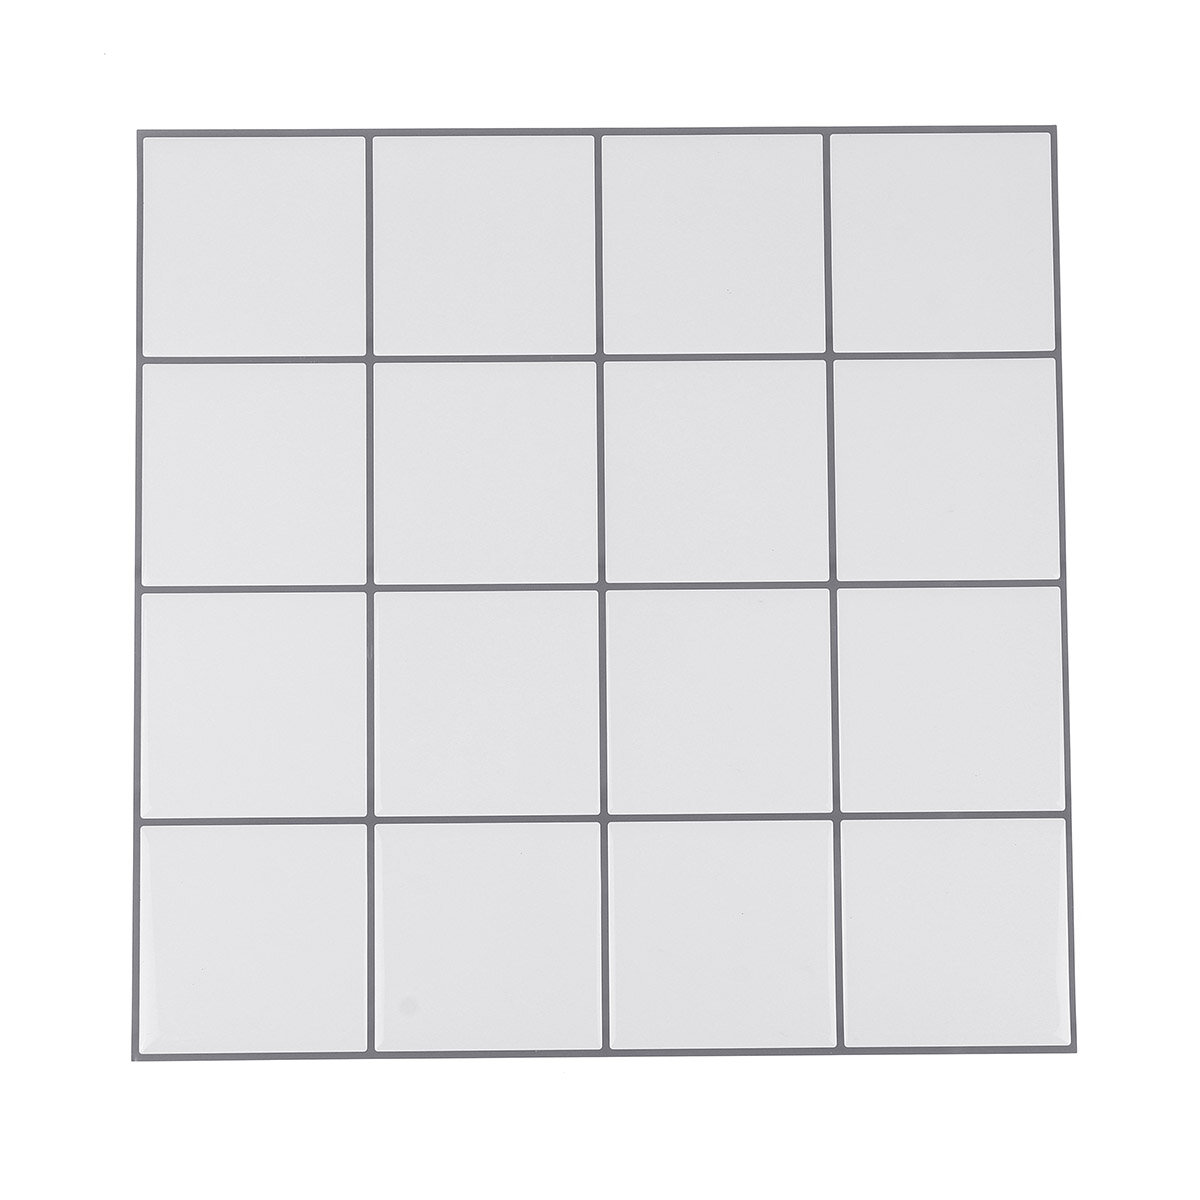 

3D Tile Stickers Kitchen Bathroom Self-adhesive Wall Cover Decal Sticker 12''x12''